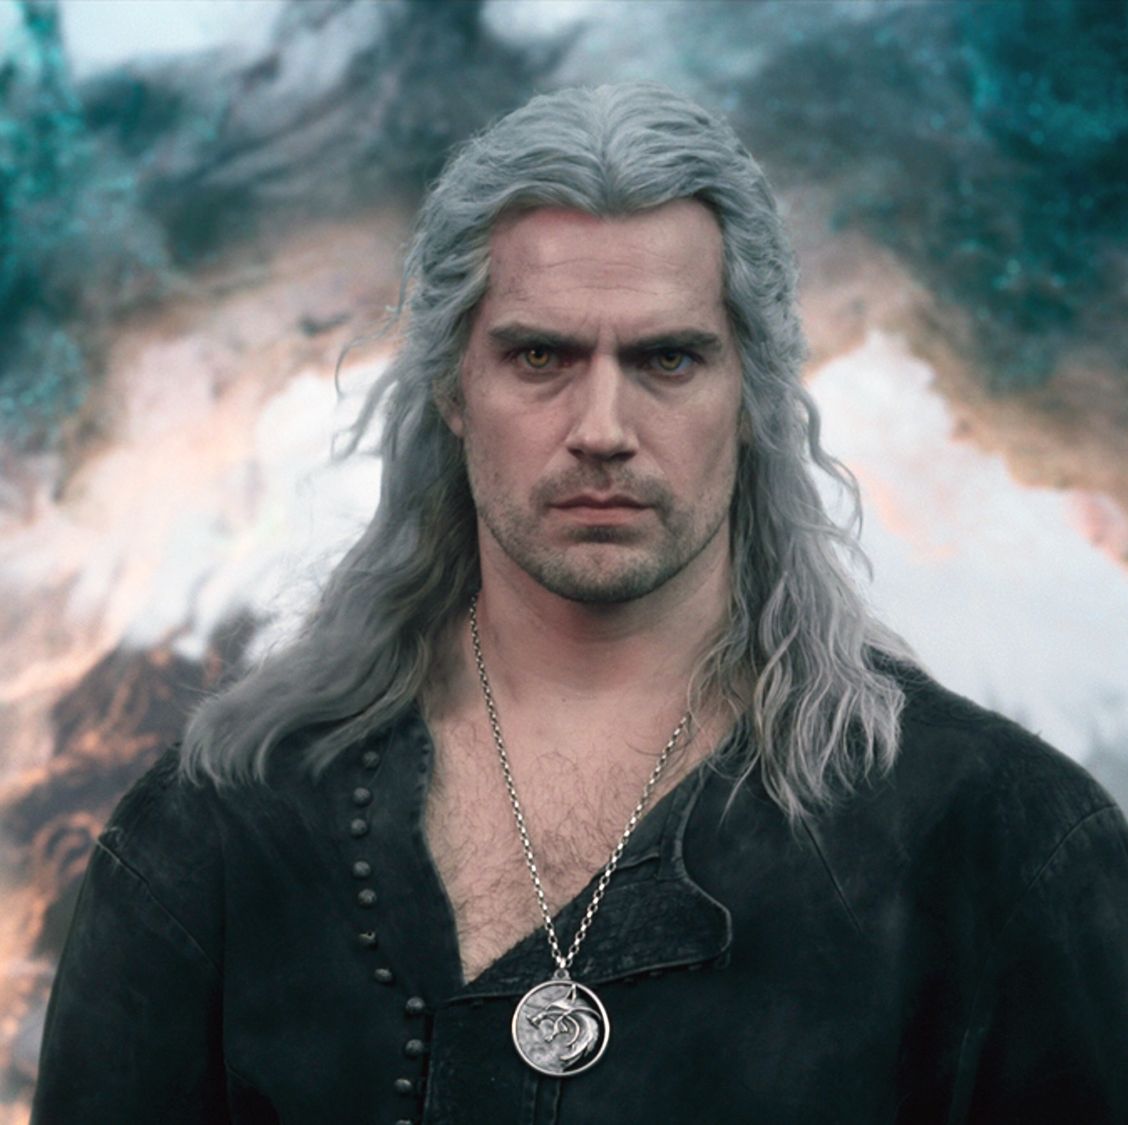 When Will The Witcher Season 4 Be Released On Netflix? - Men's Journal